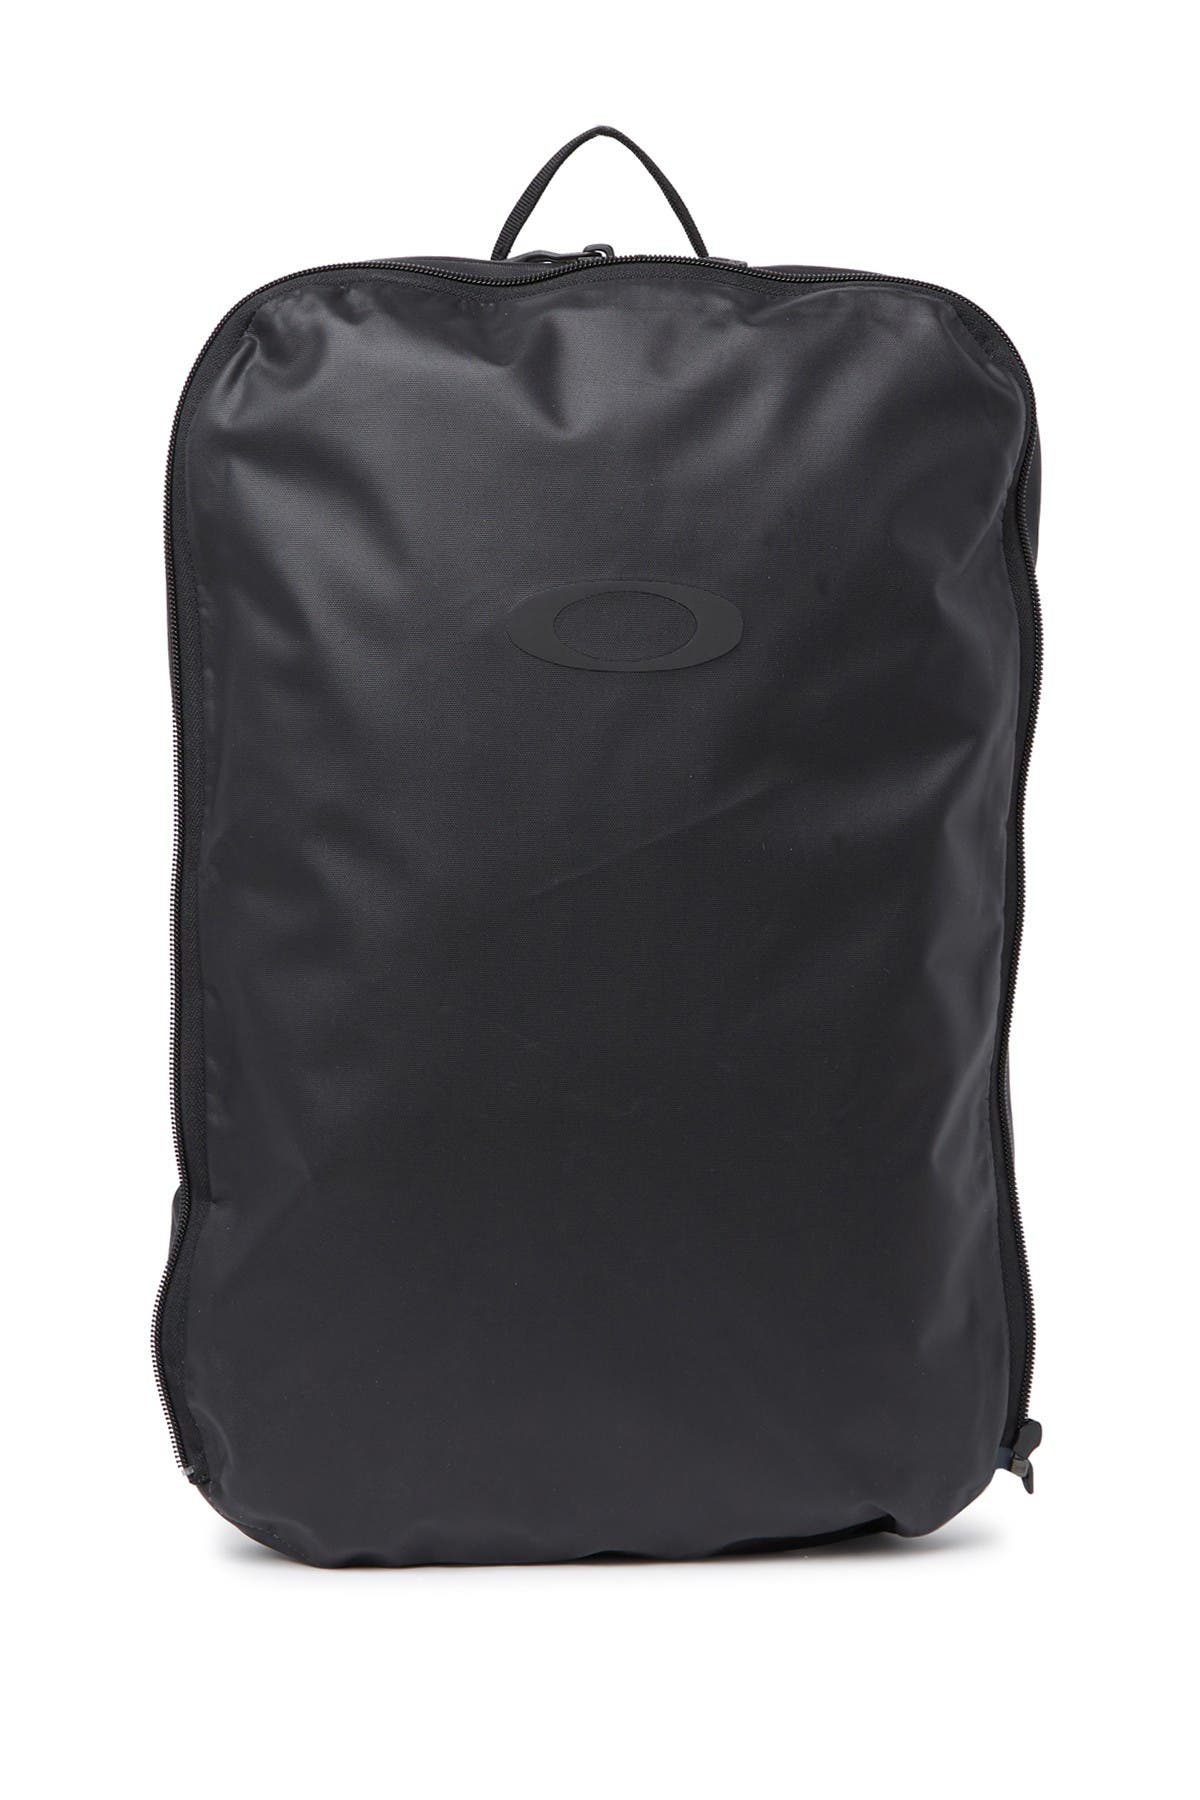 oakley two faced laptop pack